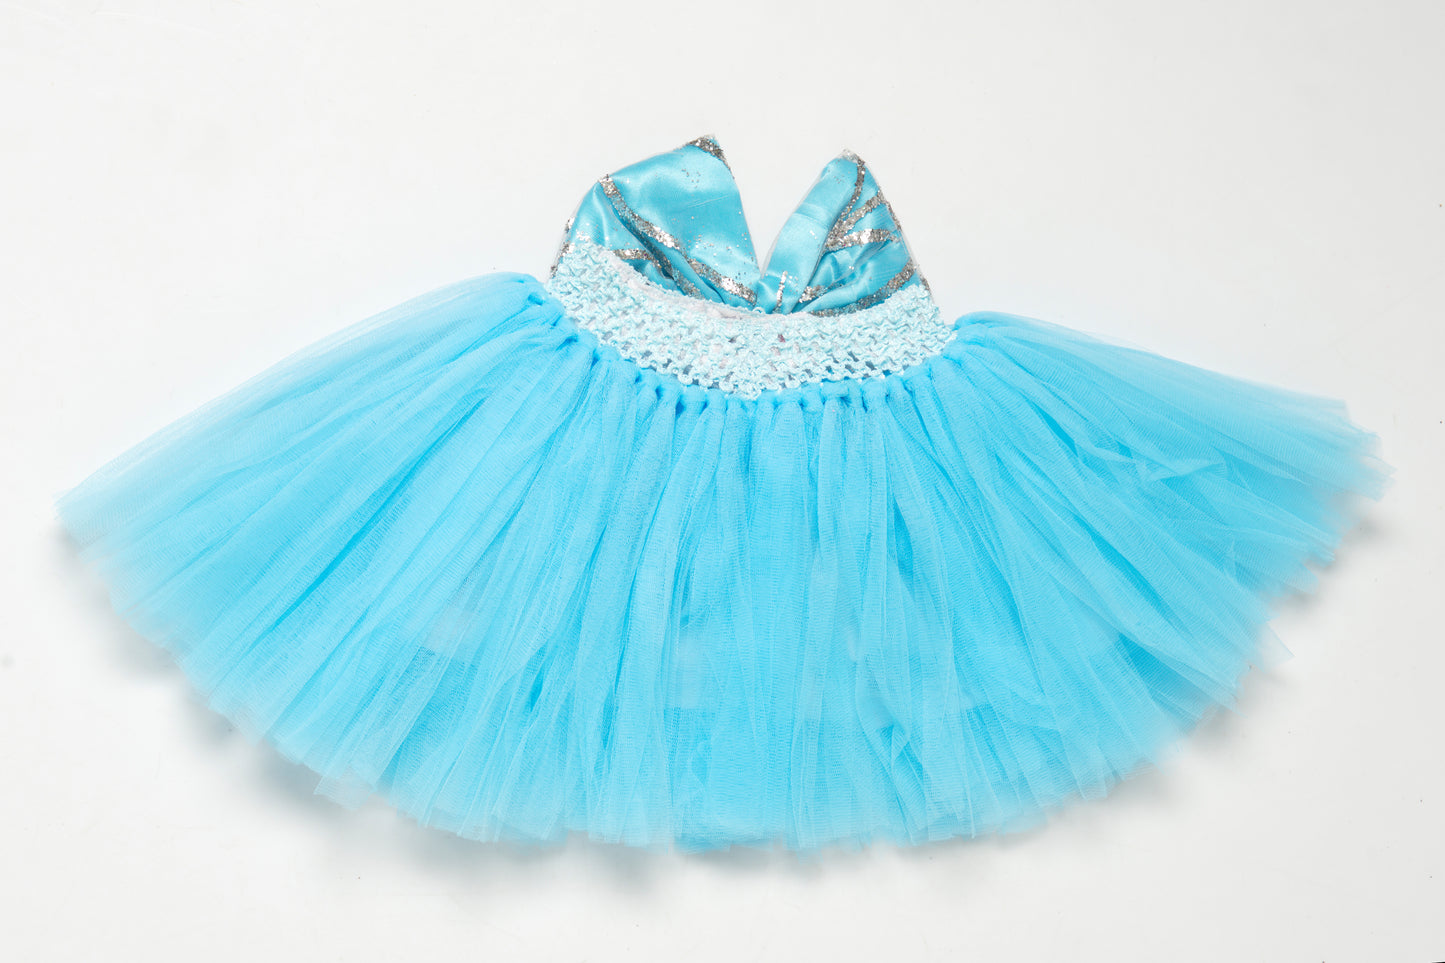 Blue Tutu Skirt with Sequins Bow